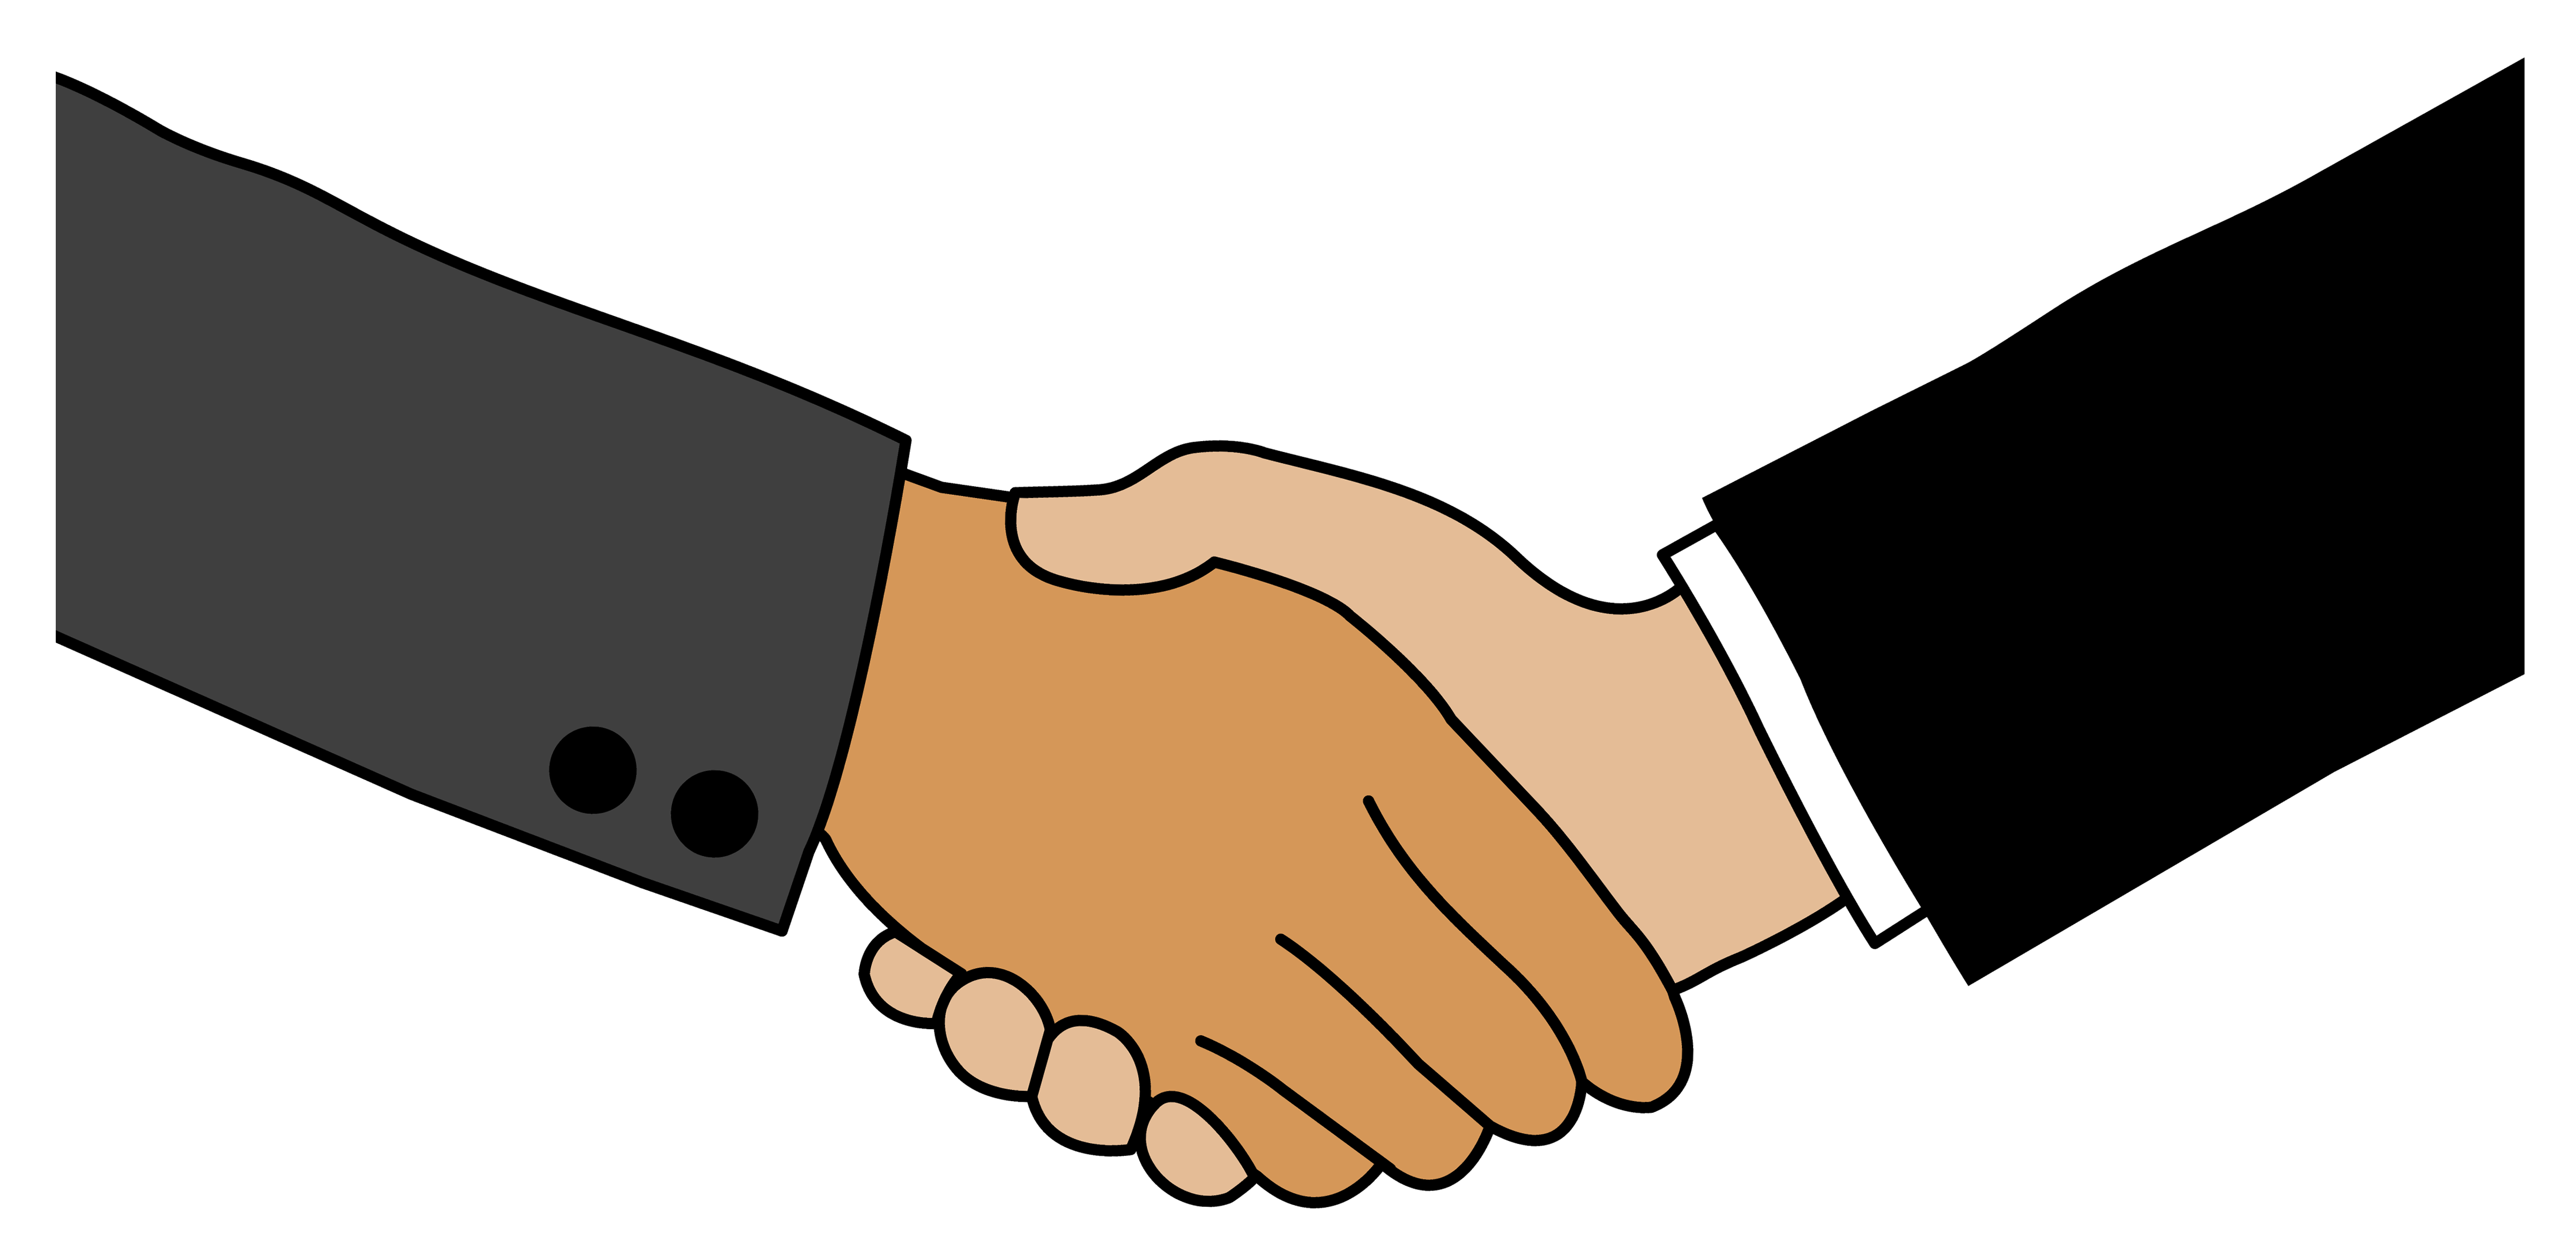 Business People Shaking Hands Clip Art - Free ...